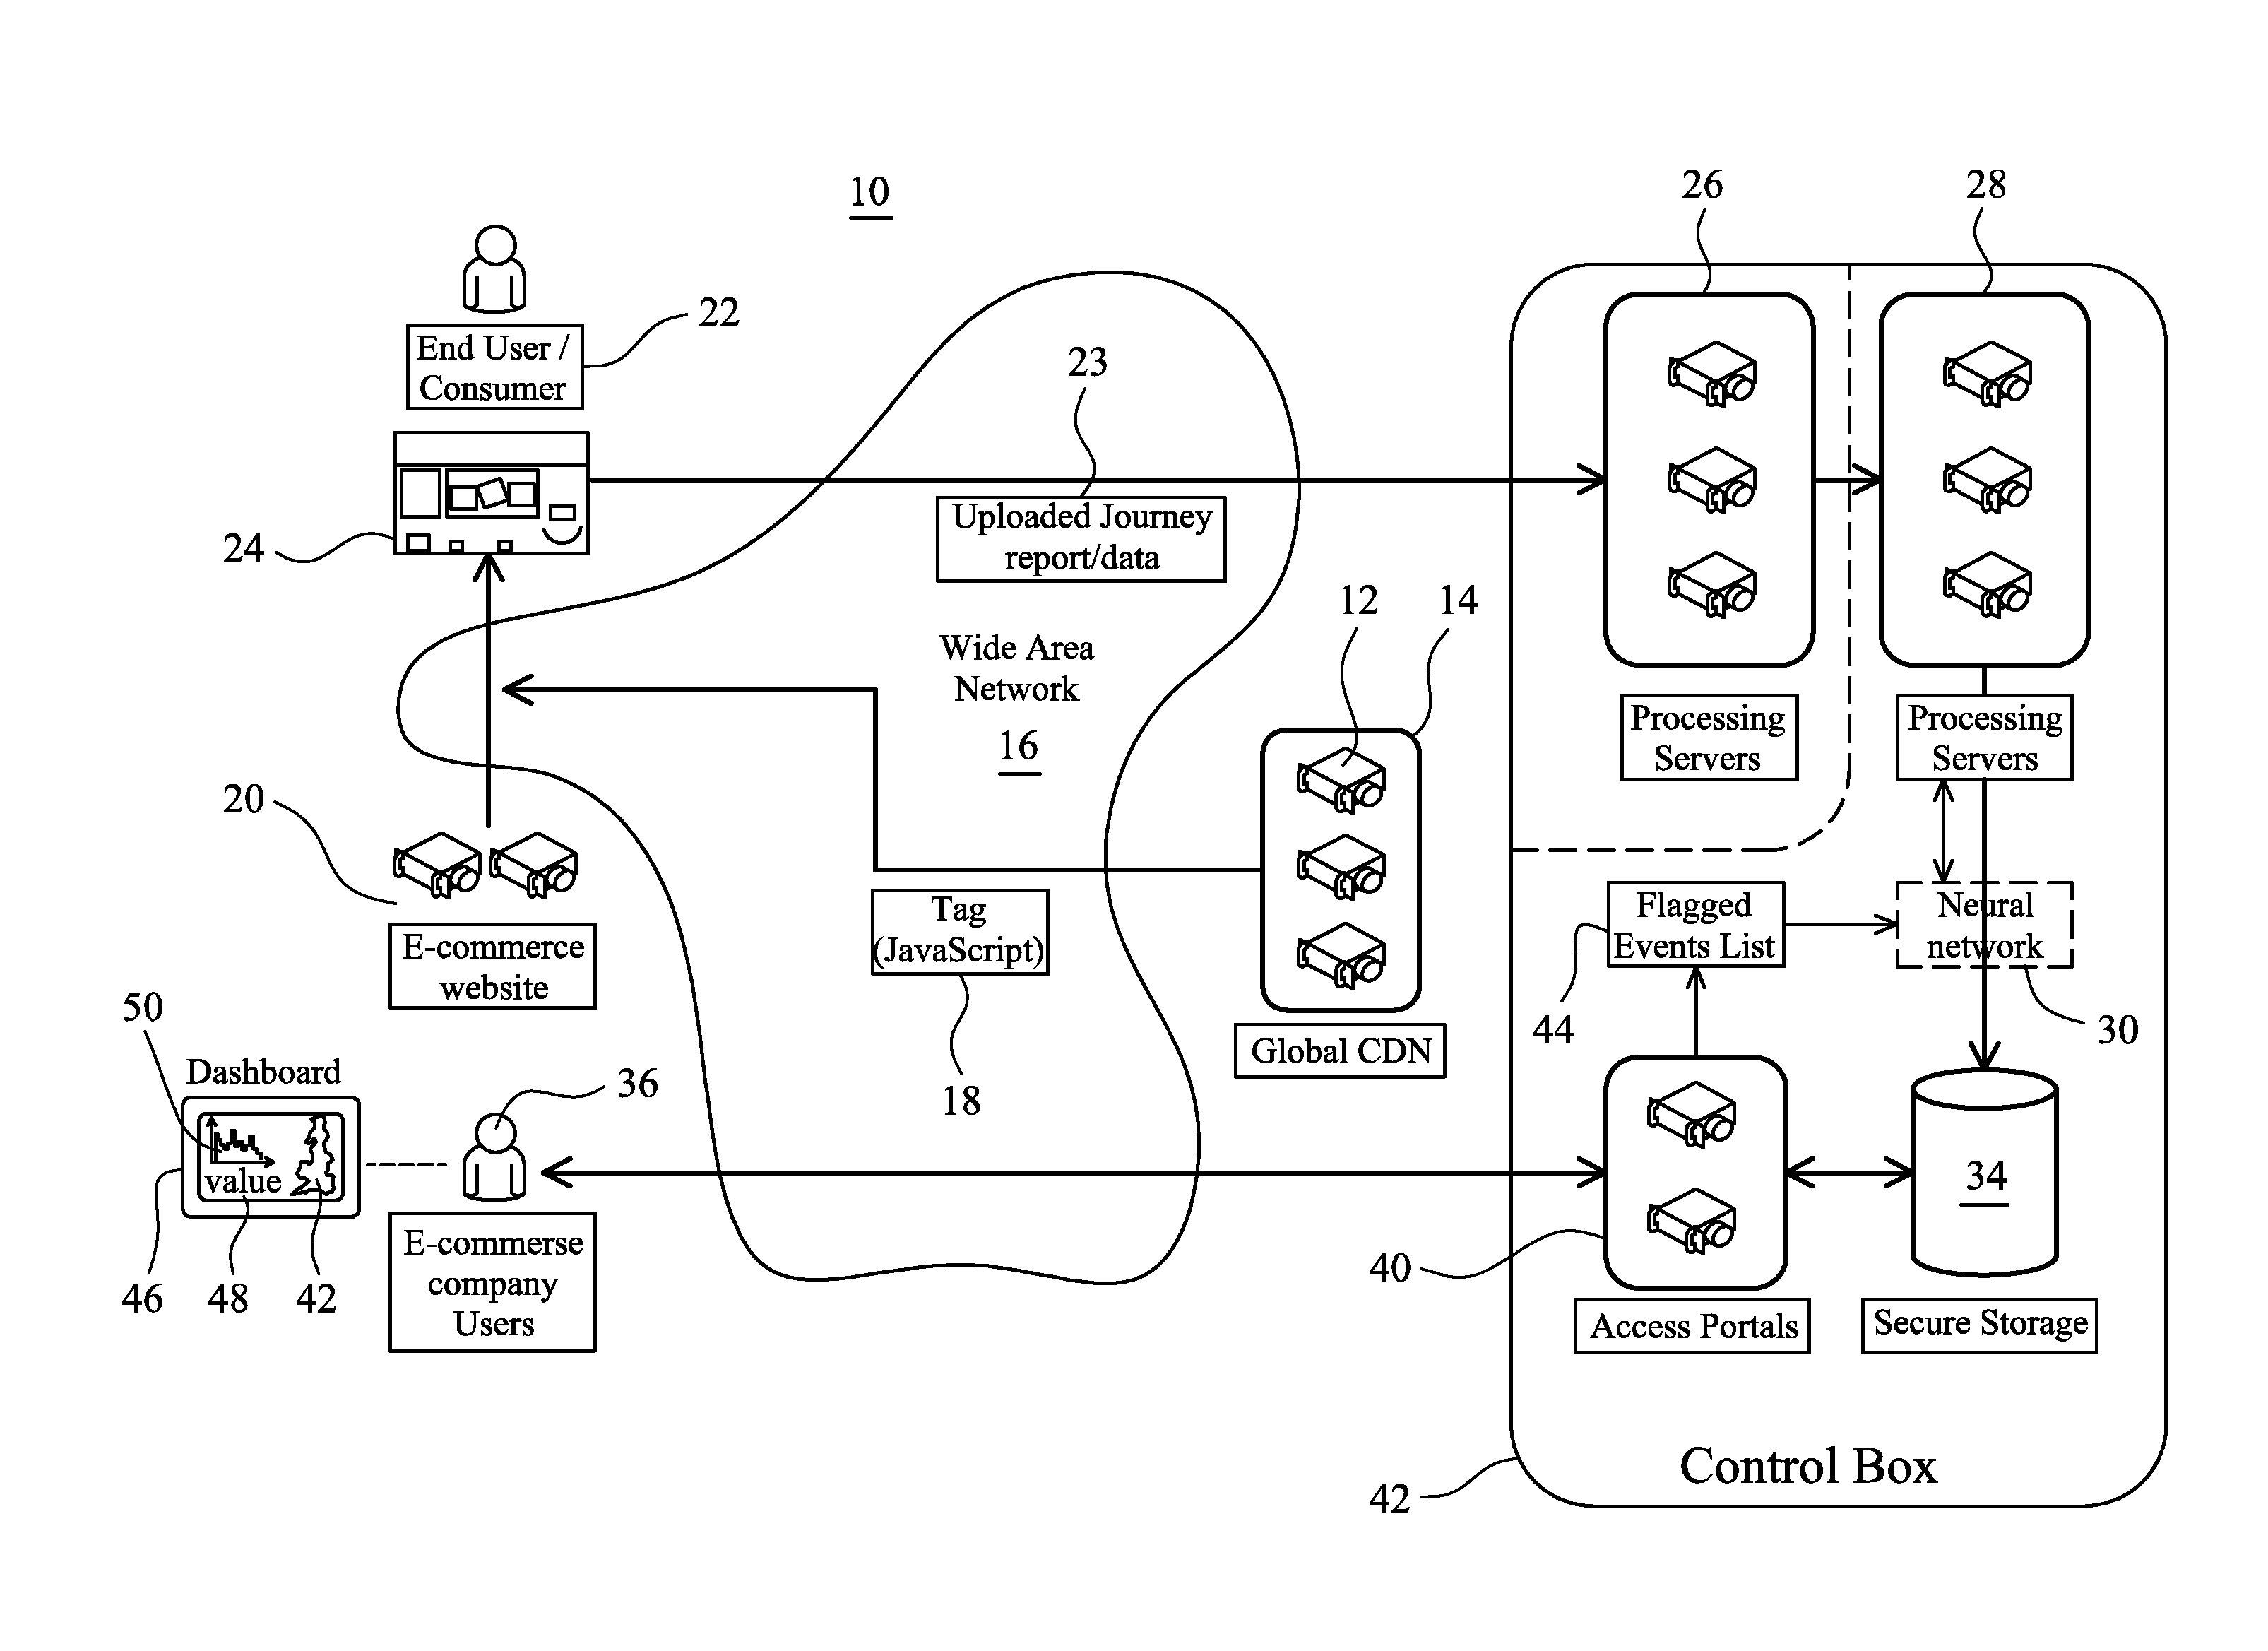 Systems and methods for recording and recreating interactive user-sessions involving an on-line server